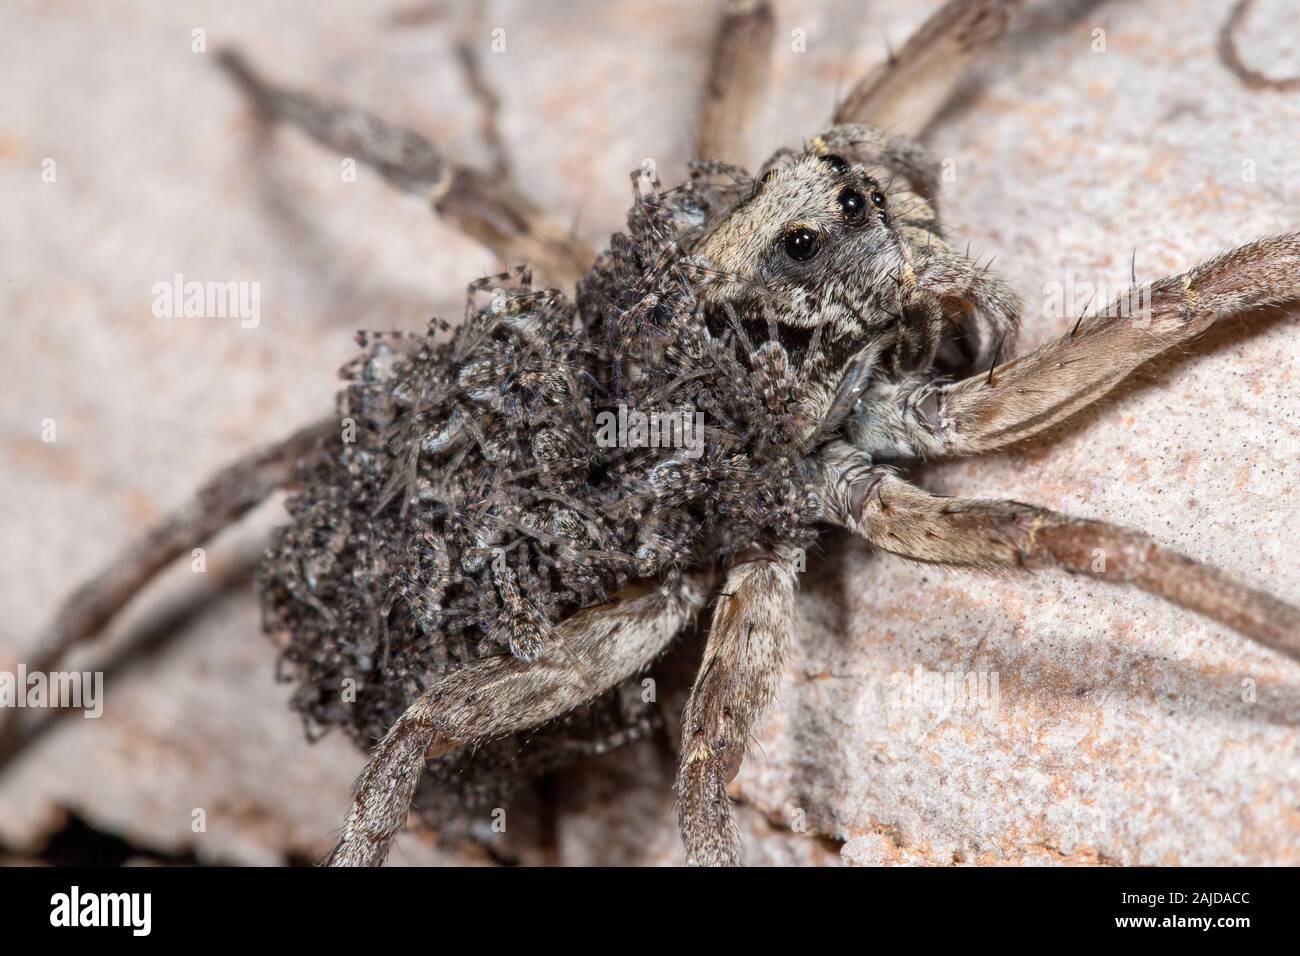 spider carrying babies